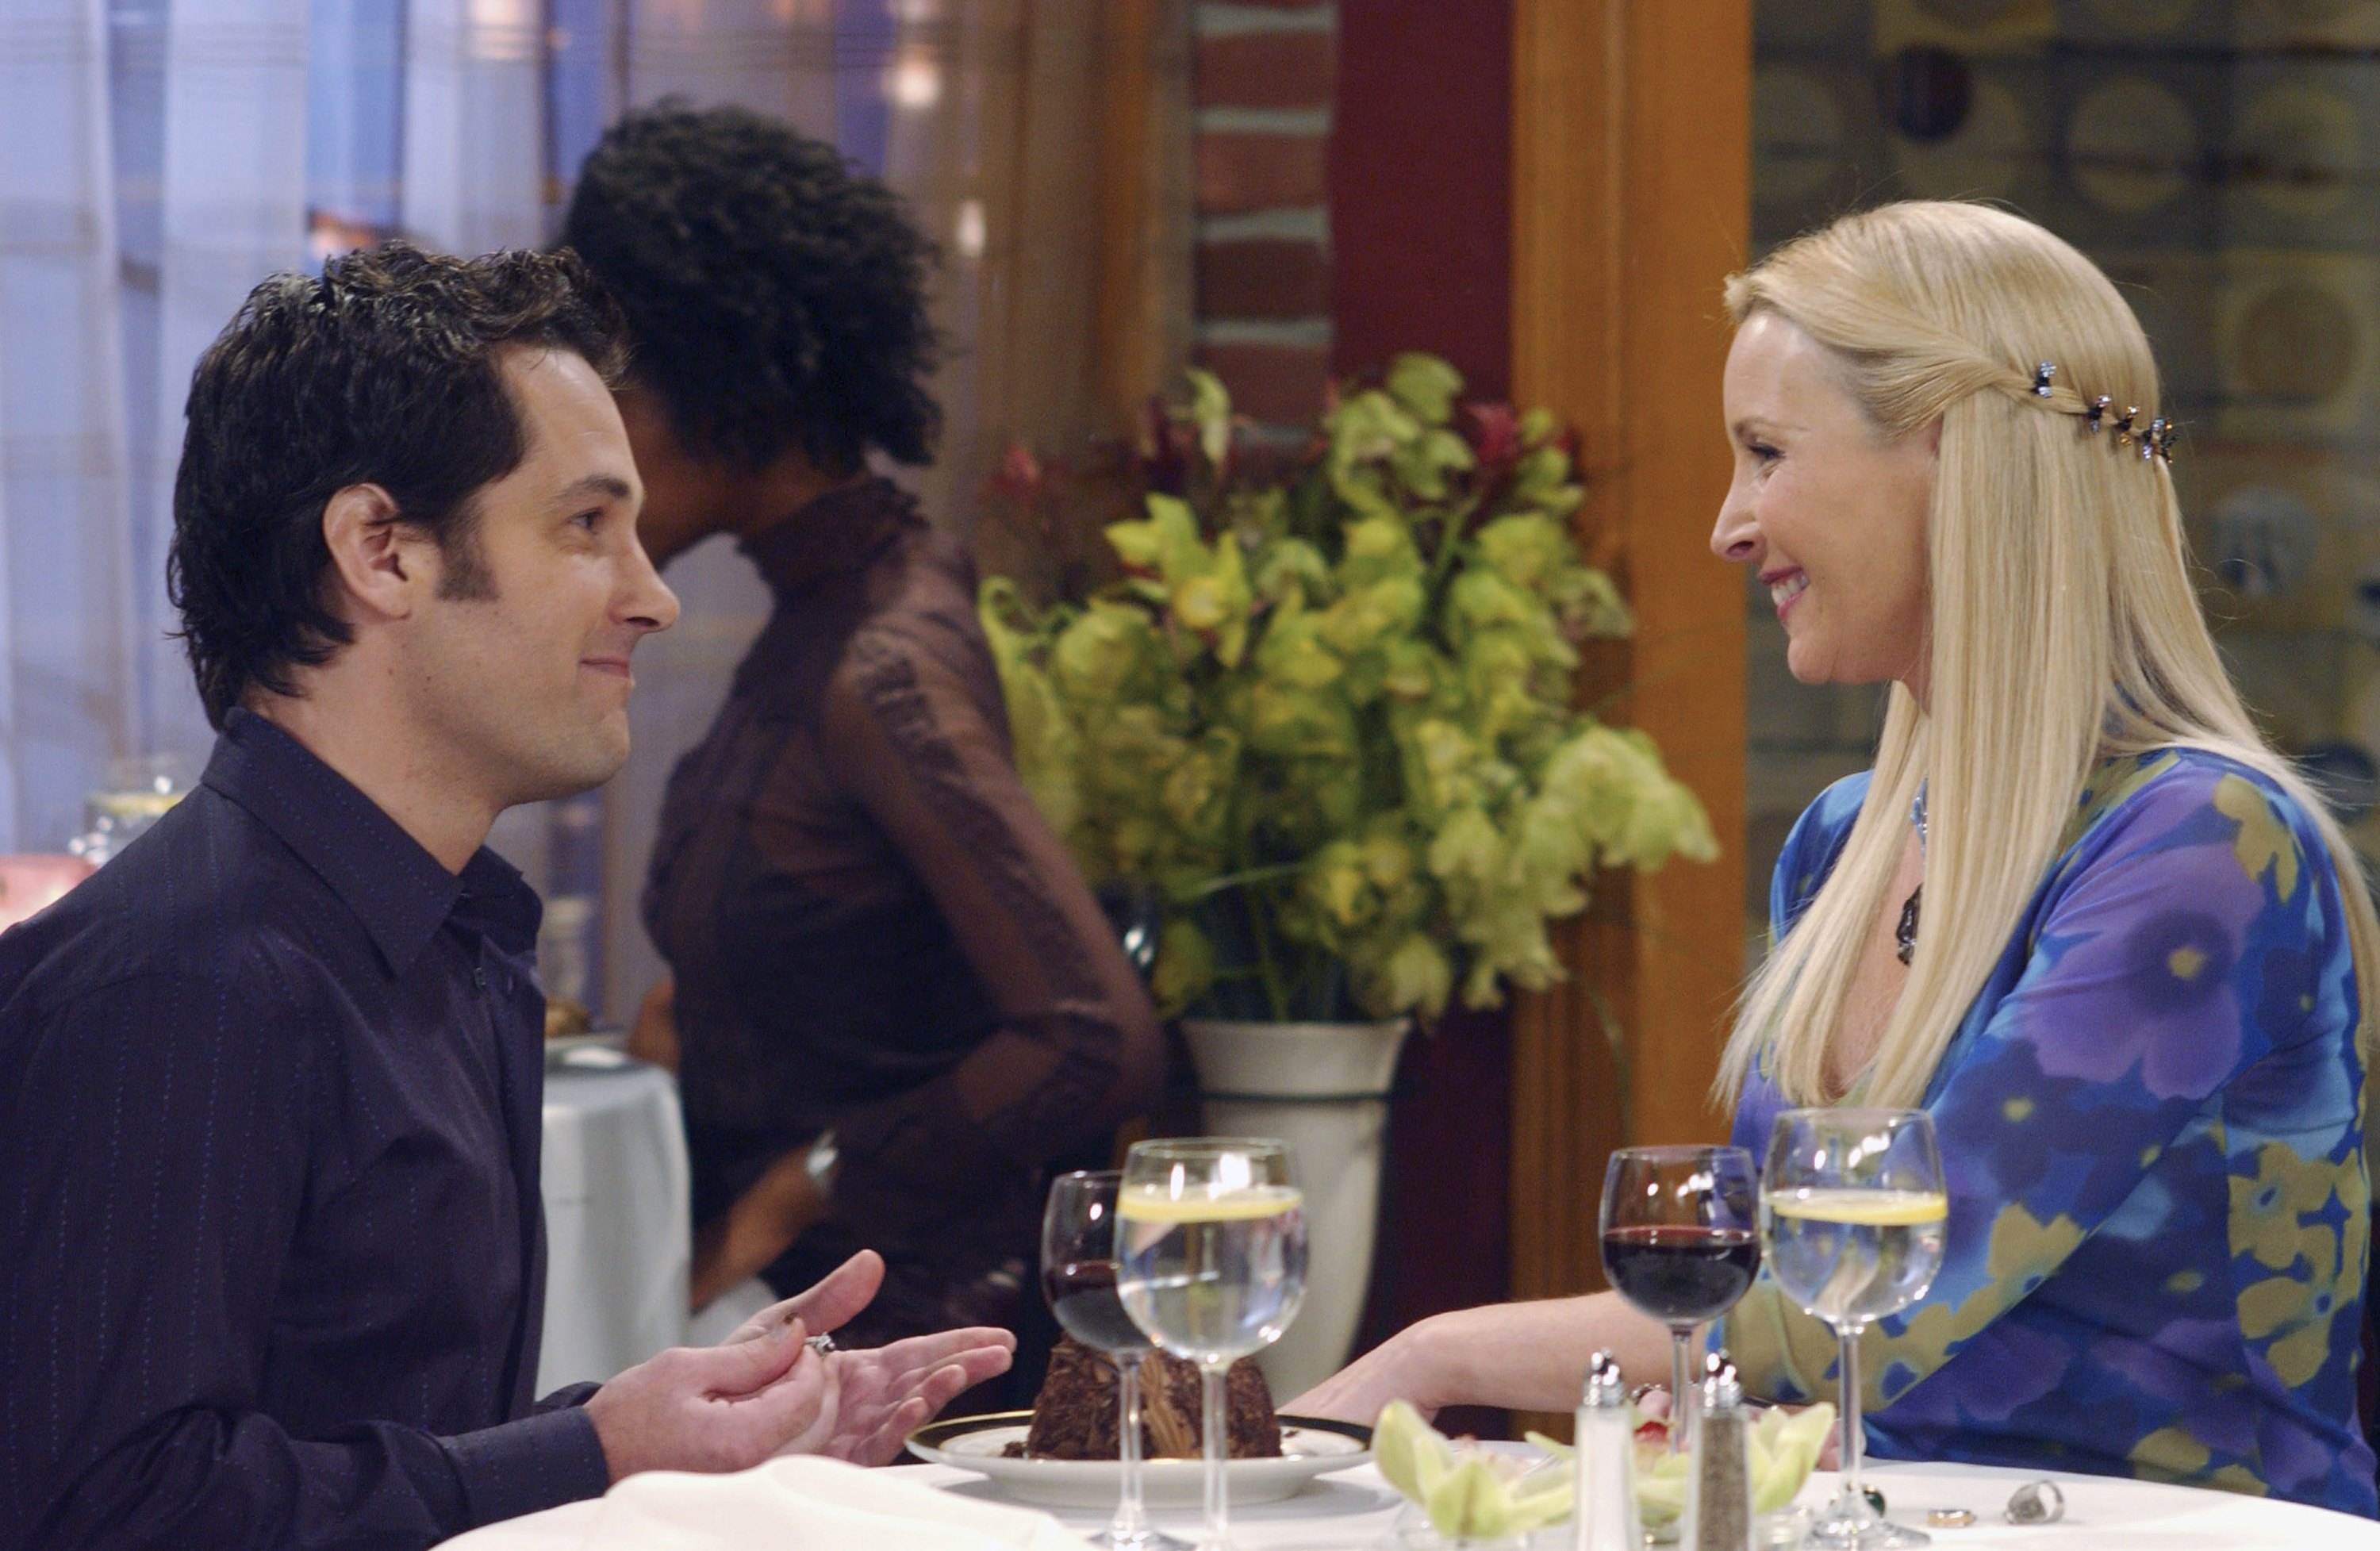 Paul Rudd as Mike Hannigan sitting at a table across from Lisa Kudrow as Phoebe Buffay in 'Friends'